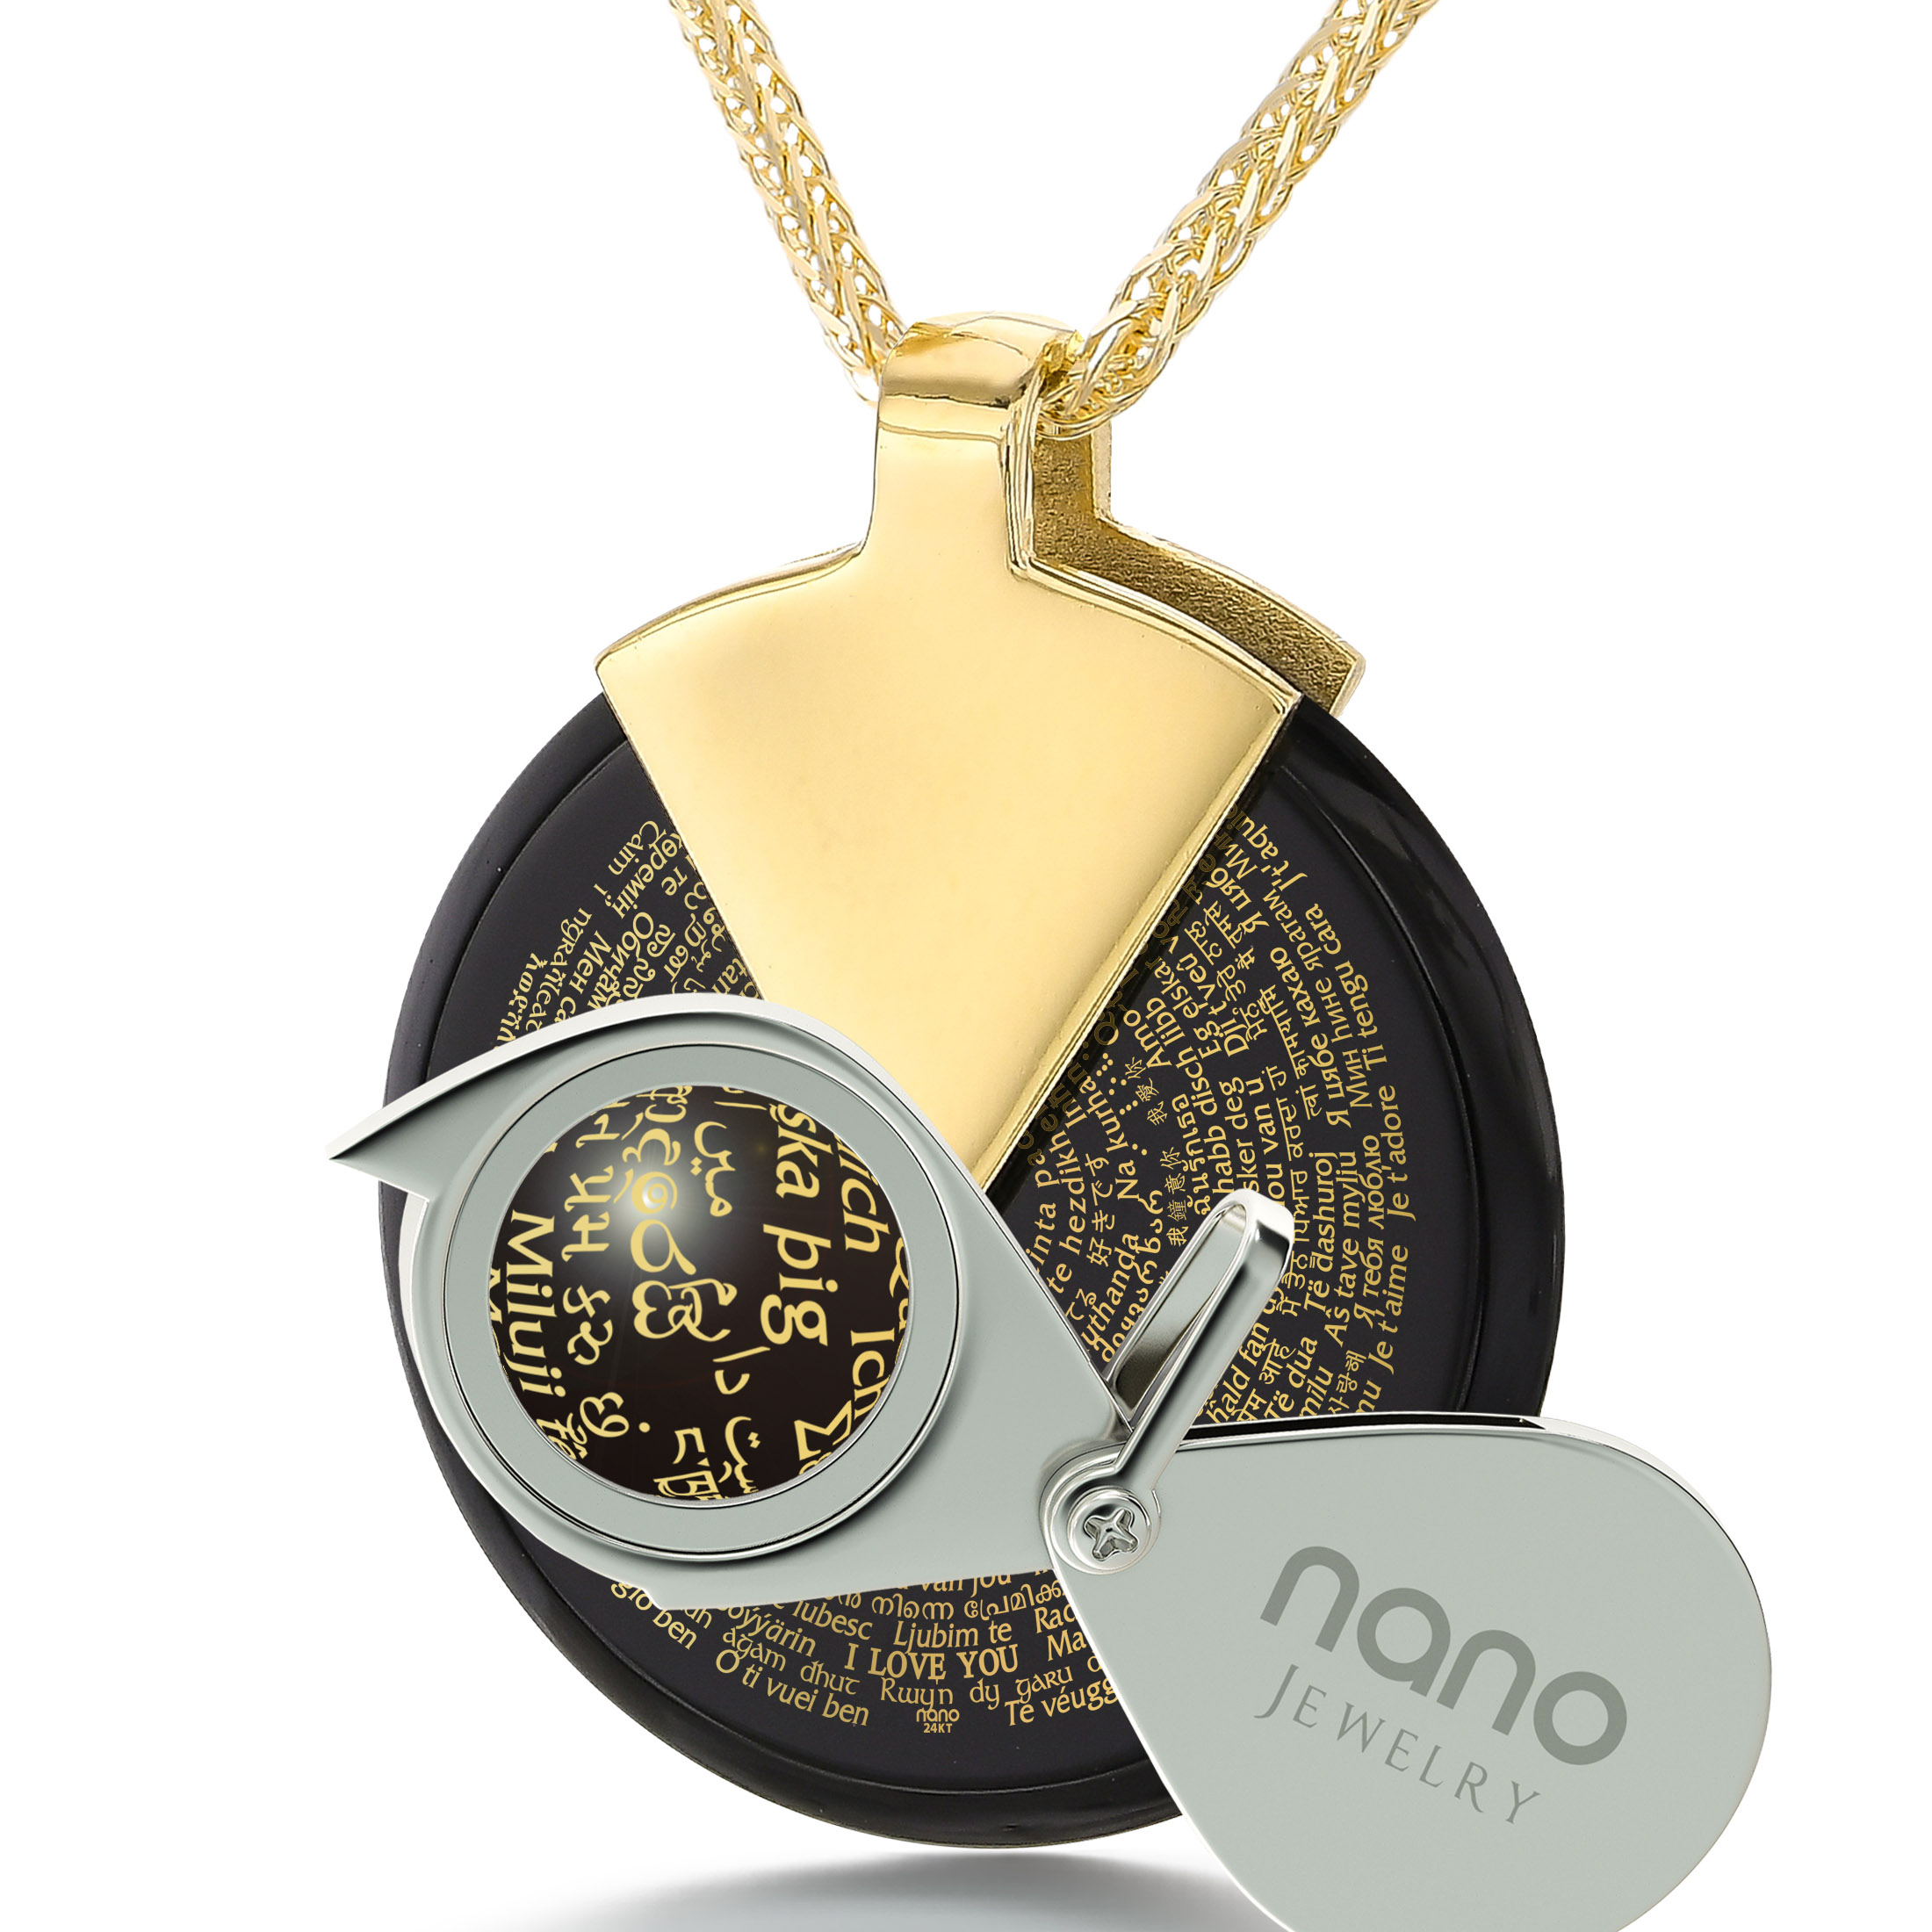 Spinning Onyx Pendant - 'I Love You' in 120 languages